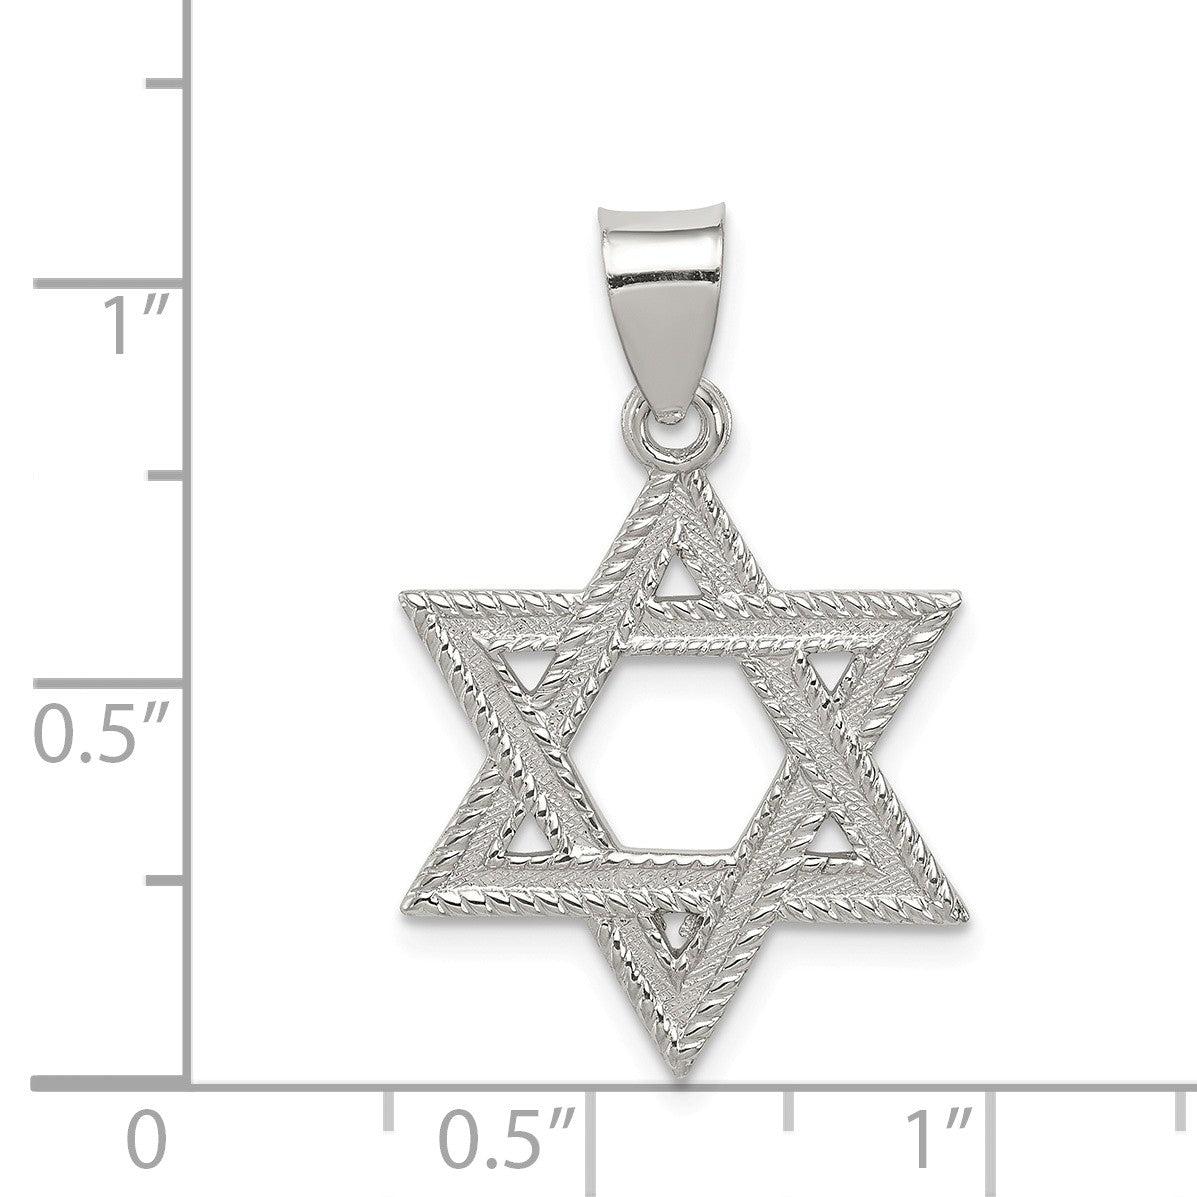 Alternate view of the Sterling Silver Satin Textured Star of David Charm or Pendant by The Black Bow Jewelry Co.